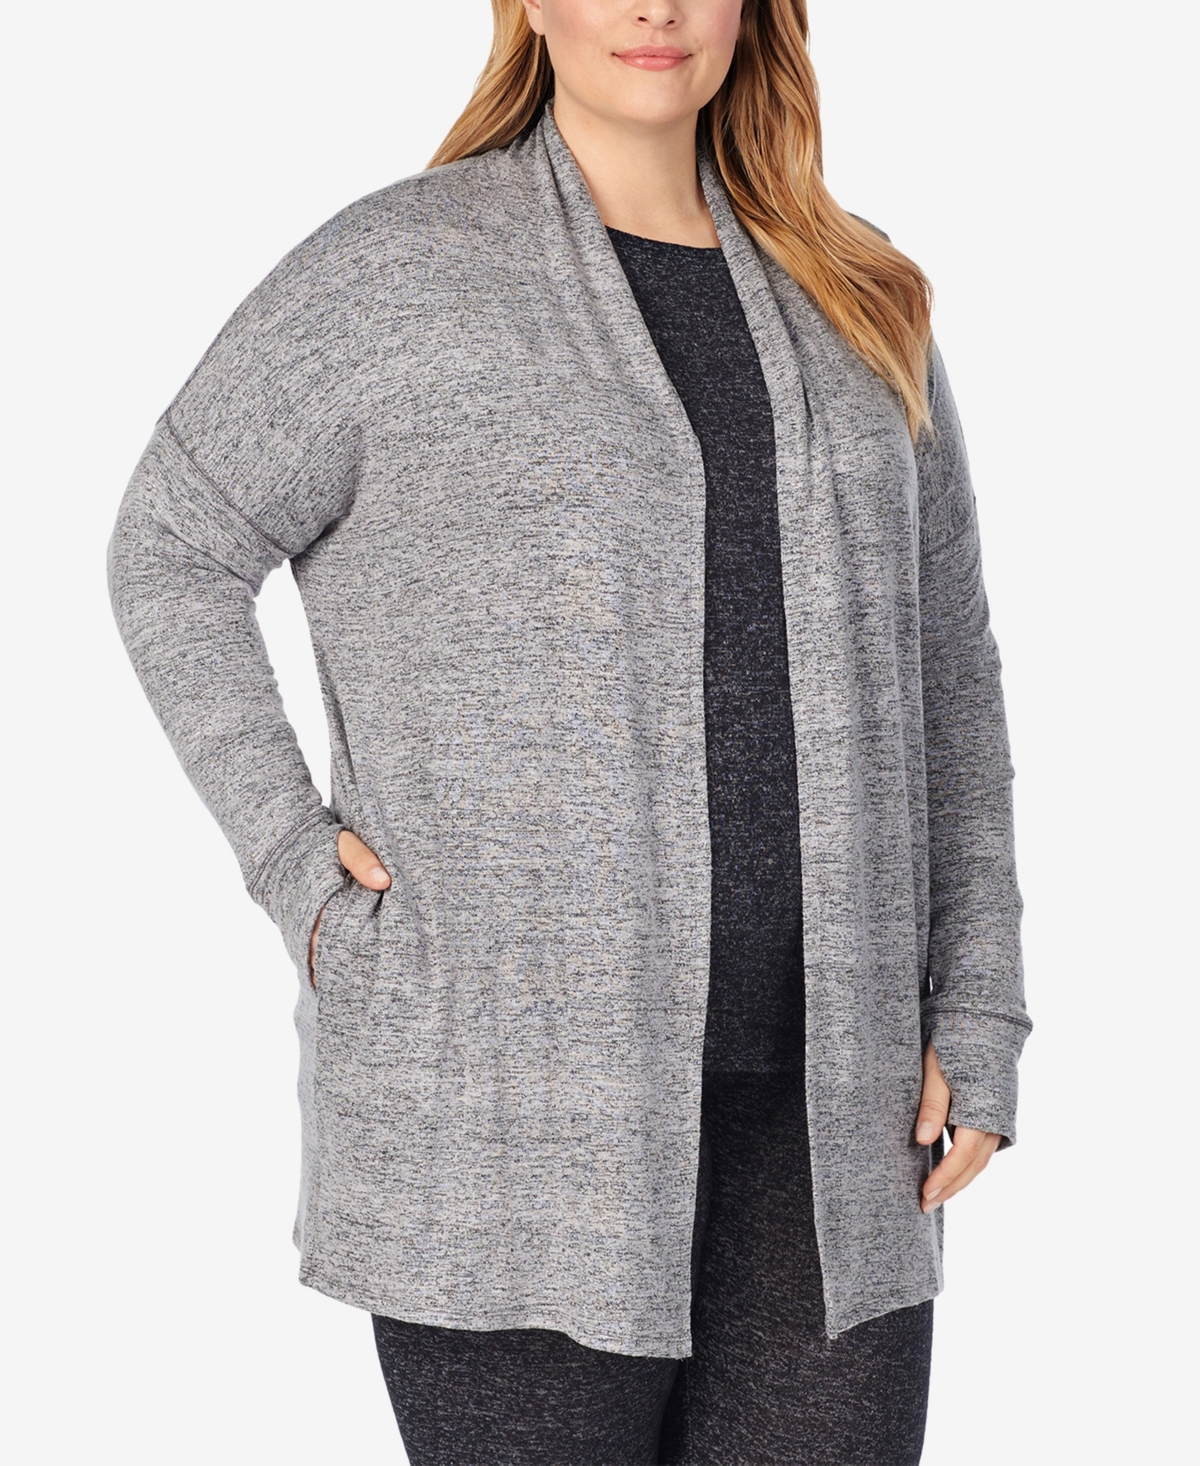 Cuddle Duds Plus Size Soft Knit Open-Front Wrap - Marled Grey